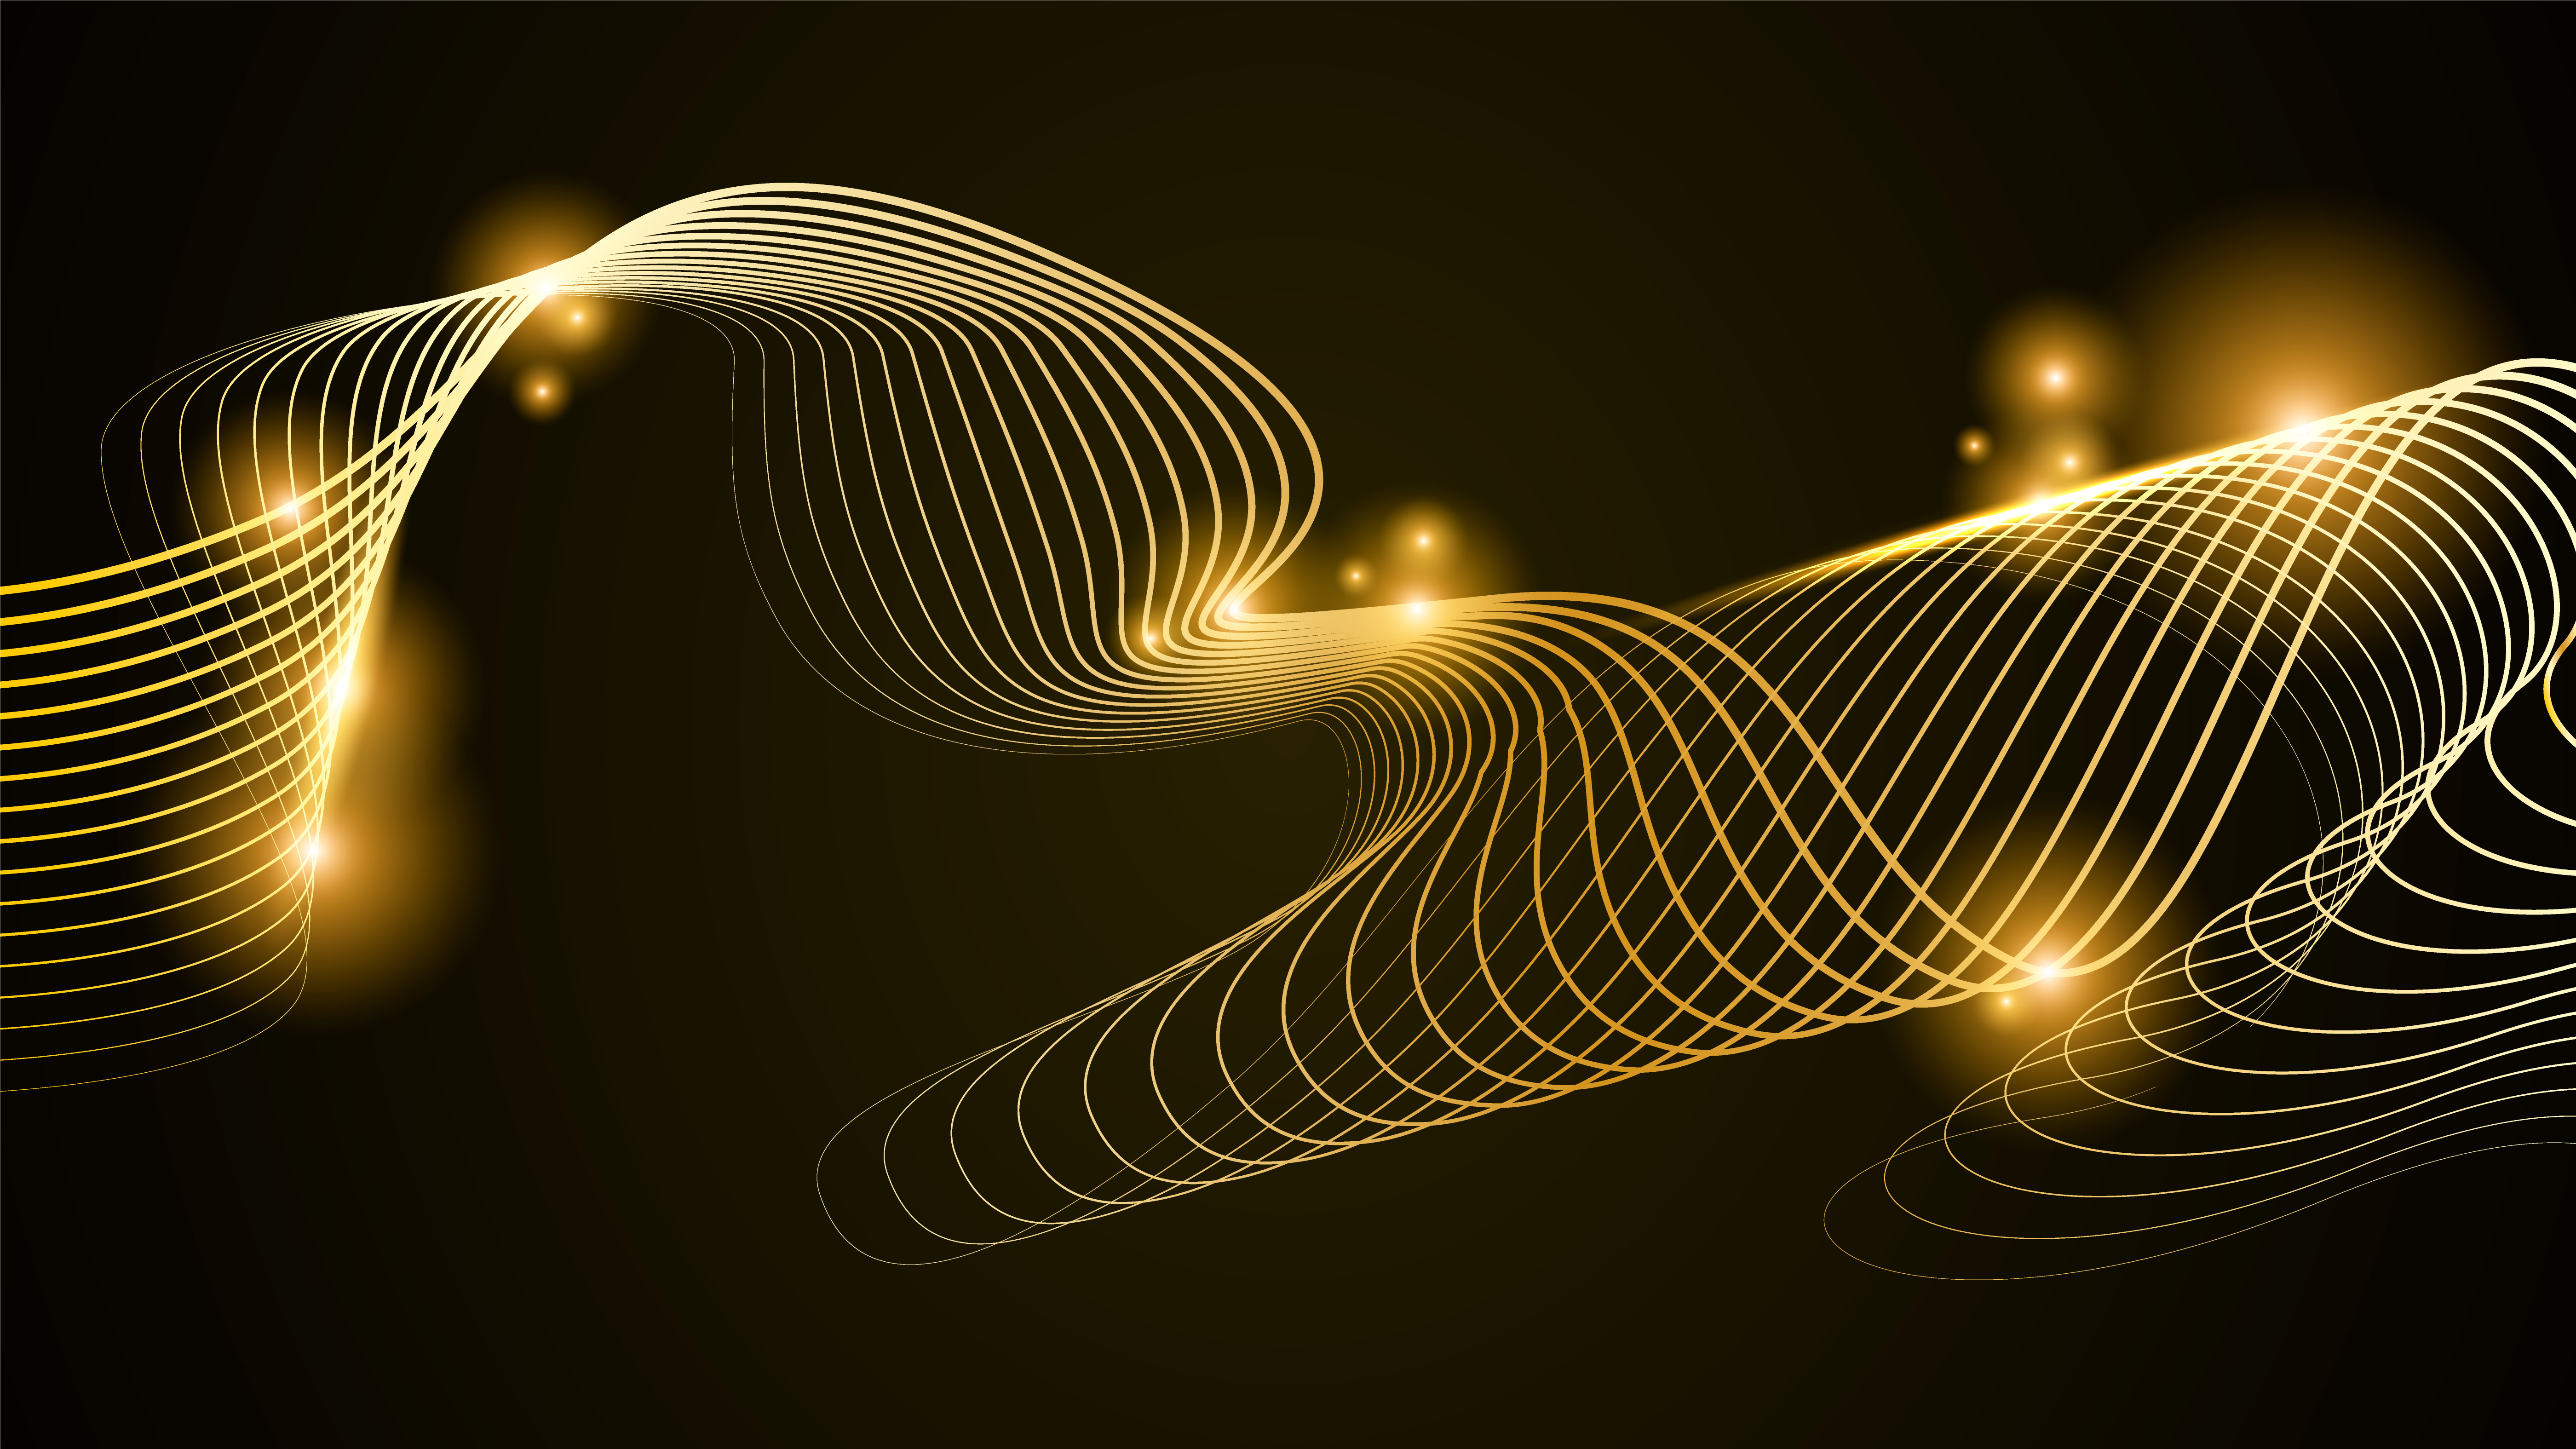 golden line abstract illustration - Download Free Vectors, Clipart